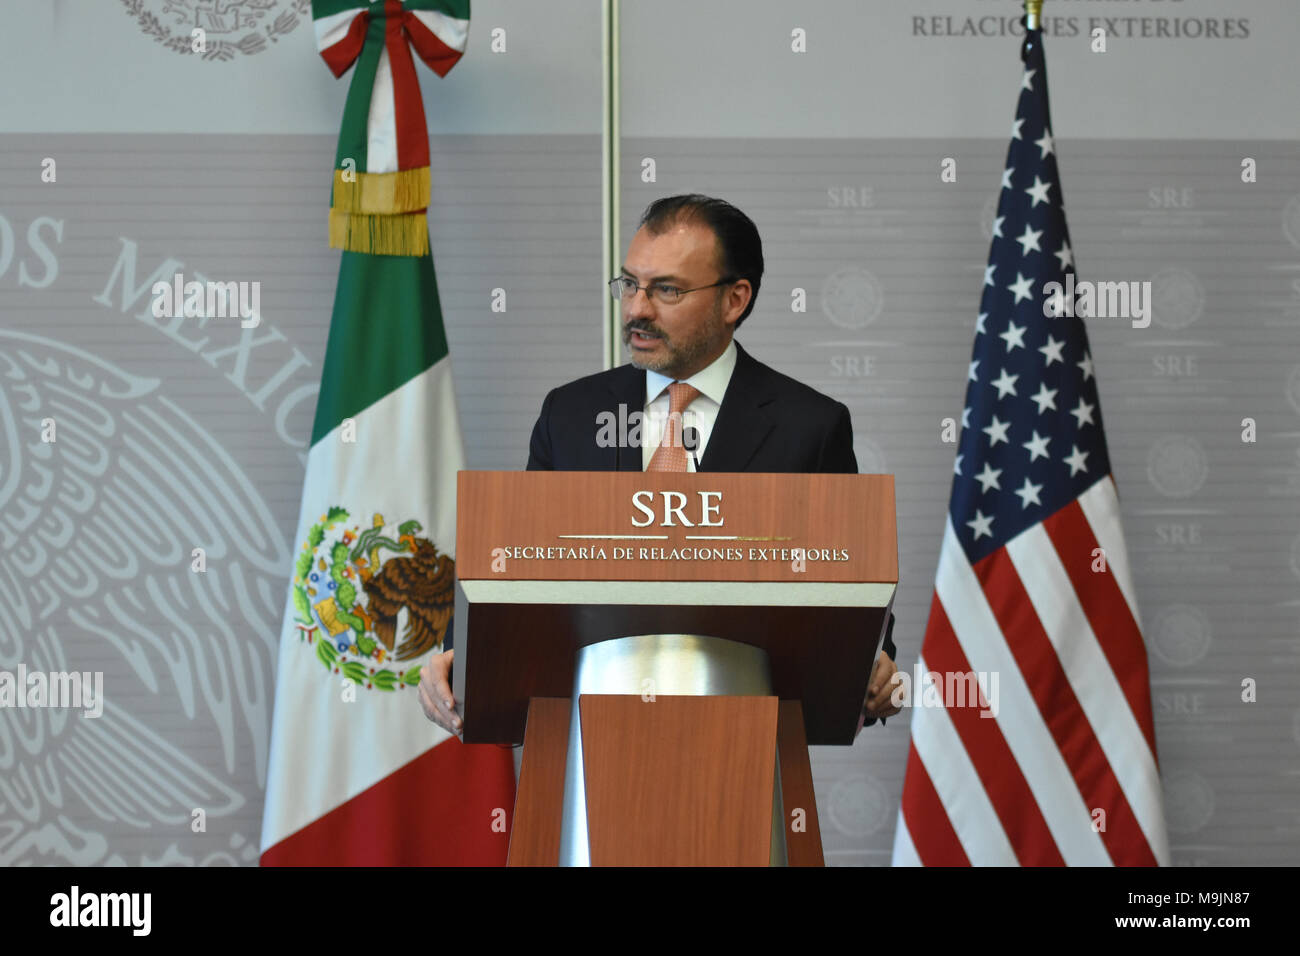 CIDADE DO MÉXICO, DF - 26.03.2018: KIRSTJEN NIELSEN VISITA DE TRABALHO AO MÉX - Secretary of Foreign Affairs Luis Videgaray during a press conference as part of Kirstjen Nielsen working in Mexico, I have talked about Migration and Security Mexico- US at Ministry of Foreign Affairs on March 26, 2018 in Mexico City, Mexico (Photo: Carlos Tischler/Fotoarena) Stock Photo